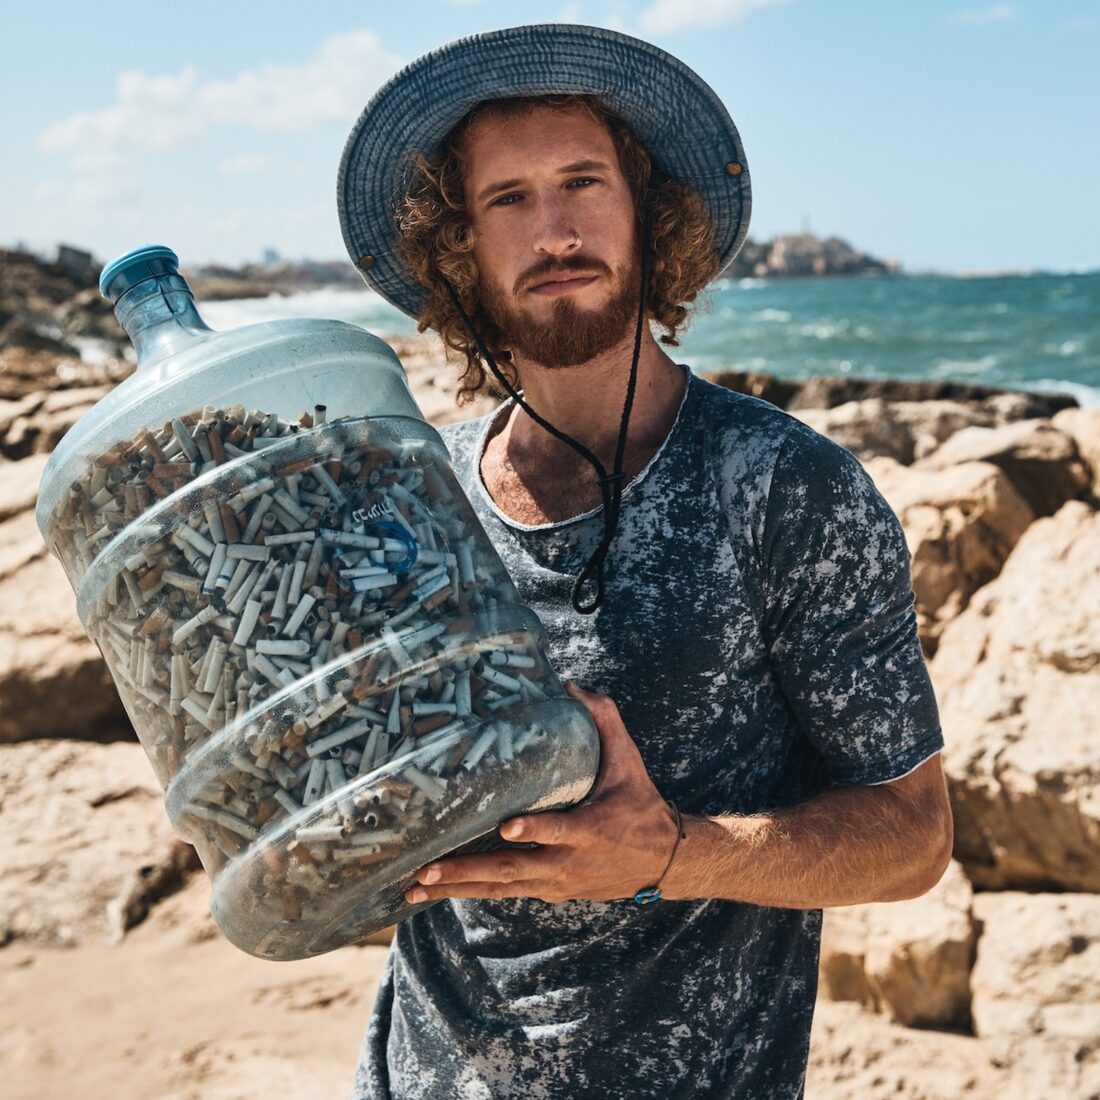 Julian Melcer with cigarette butts collected from Israel’s parks and beaches. Photo by Yossi Michaeli